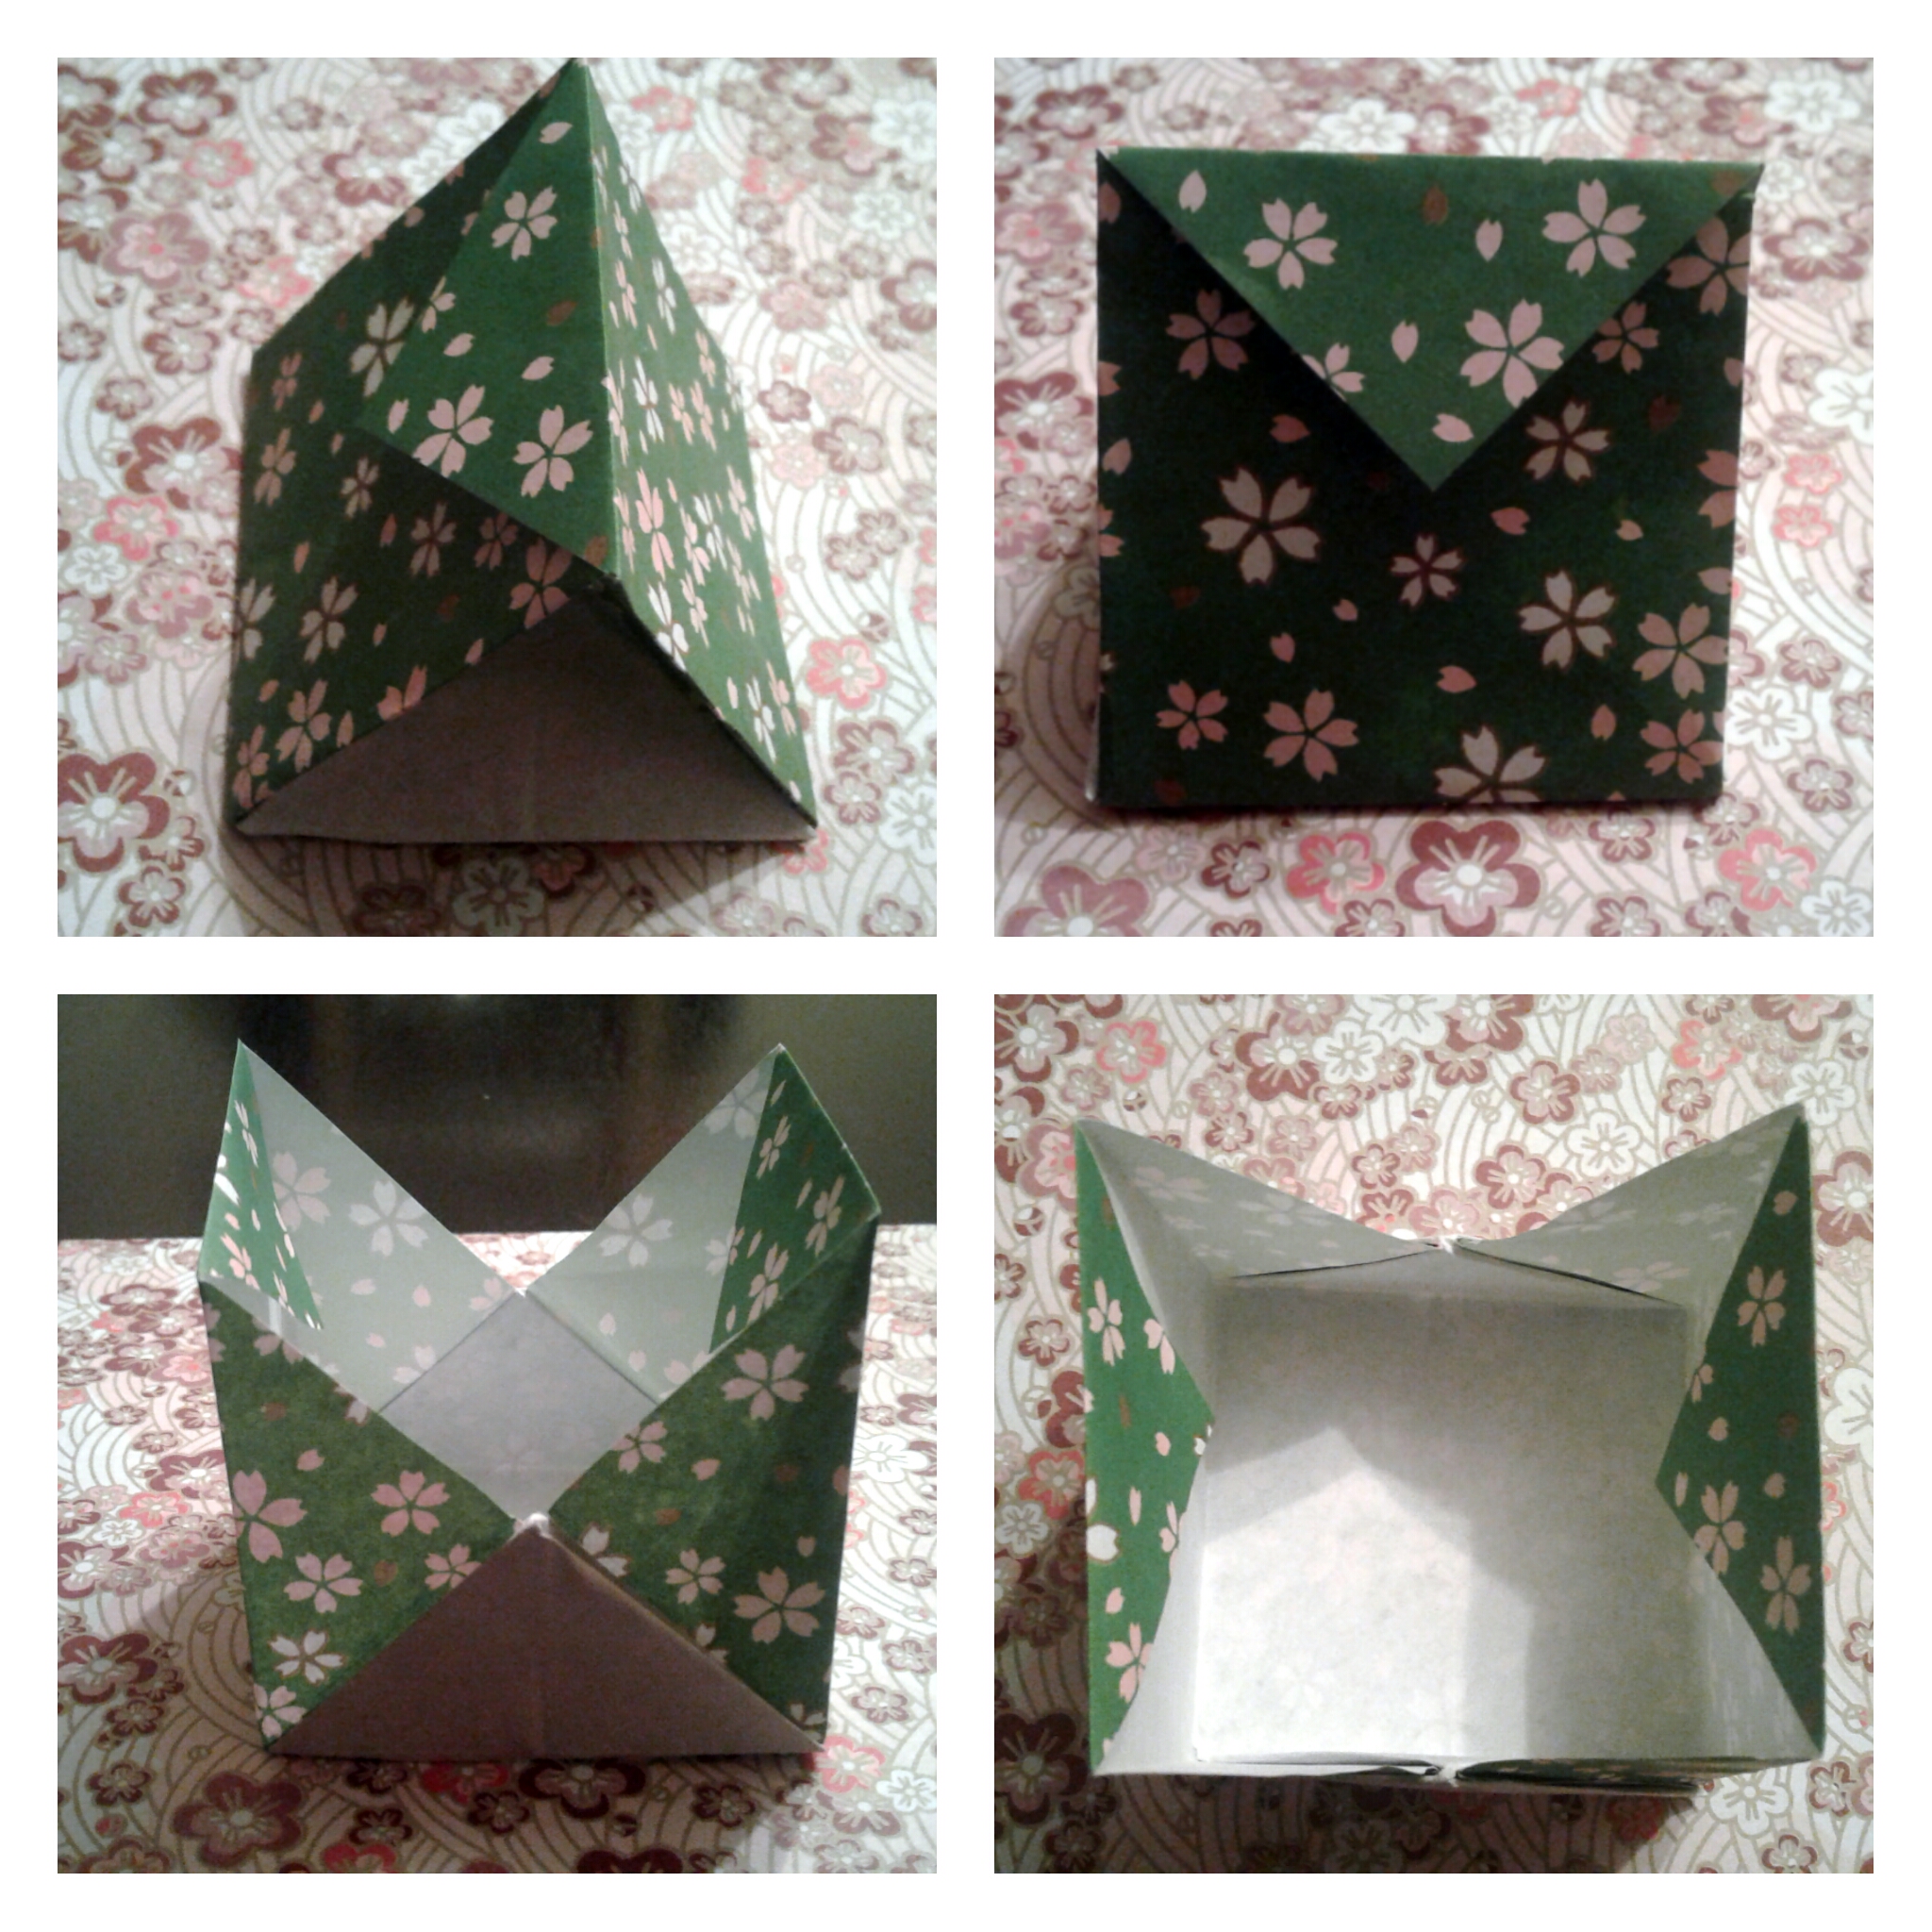 How to fold Origami gift bag from wrapping paper (Traditional) 